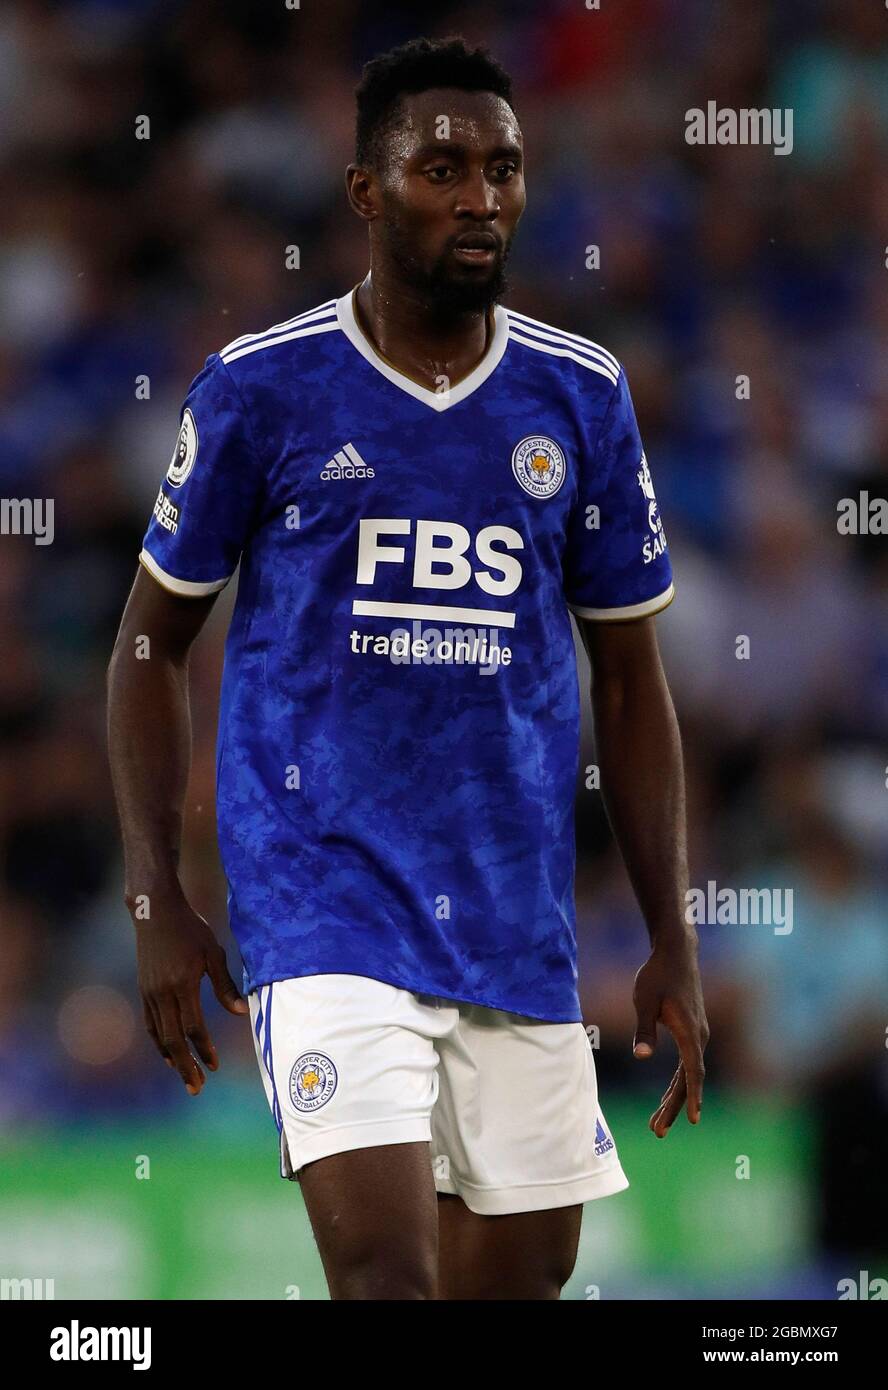 Leicester, England, 4th August 2021.  Wilfred Ndidi of Leicester City during the Pre Season Friendly match at the King Power Stadium, Leicester. Picture credit should read: Darren Staples / Sportimage Stock Photo